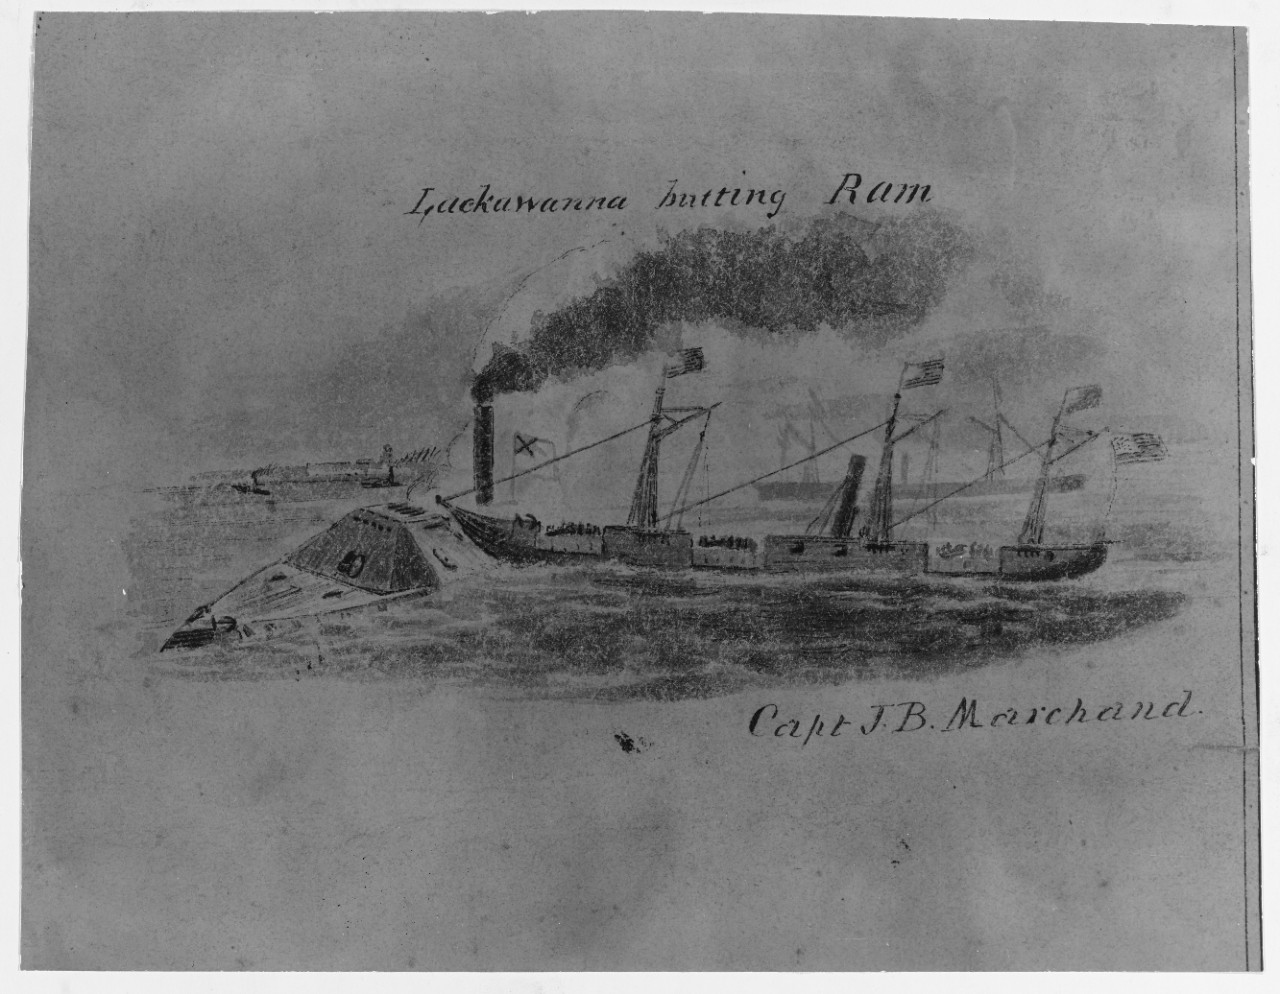 Photo #: NH 1284  Battle of Mobile Bay, 5 August 1864